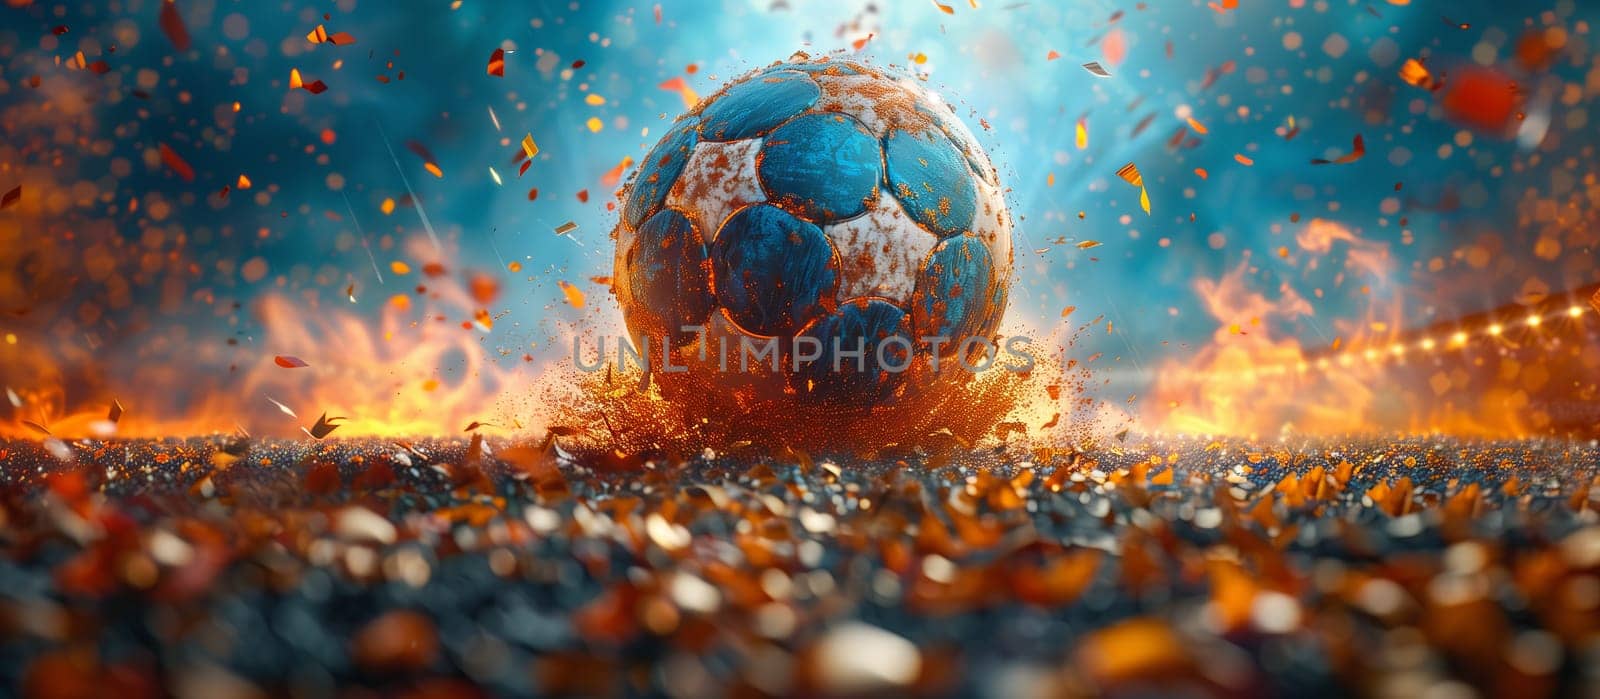 A football is soaring across the soccer field, capturing a thrilling moment in the beautiful art of sports. The crowd is cheering, enjoying the entertainment and symmetry of the event